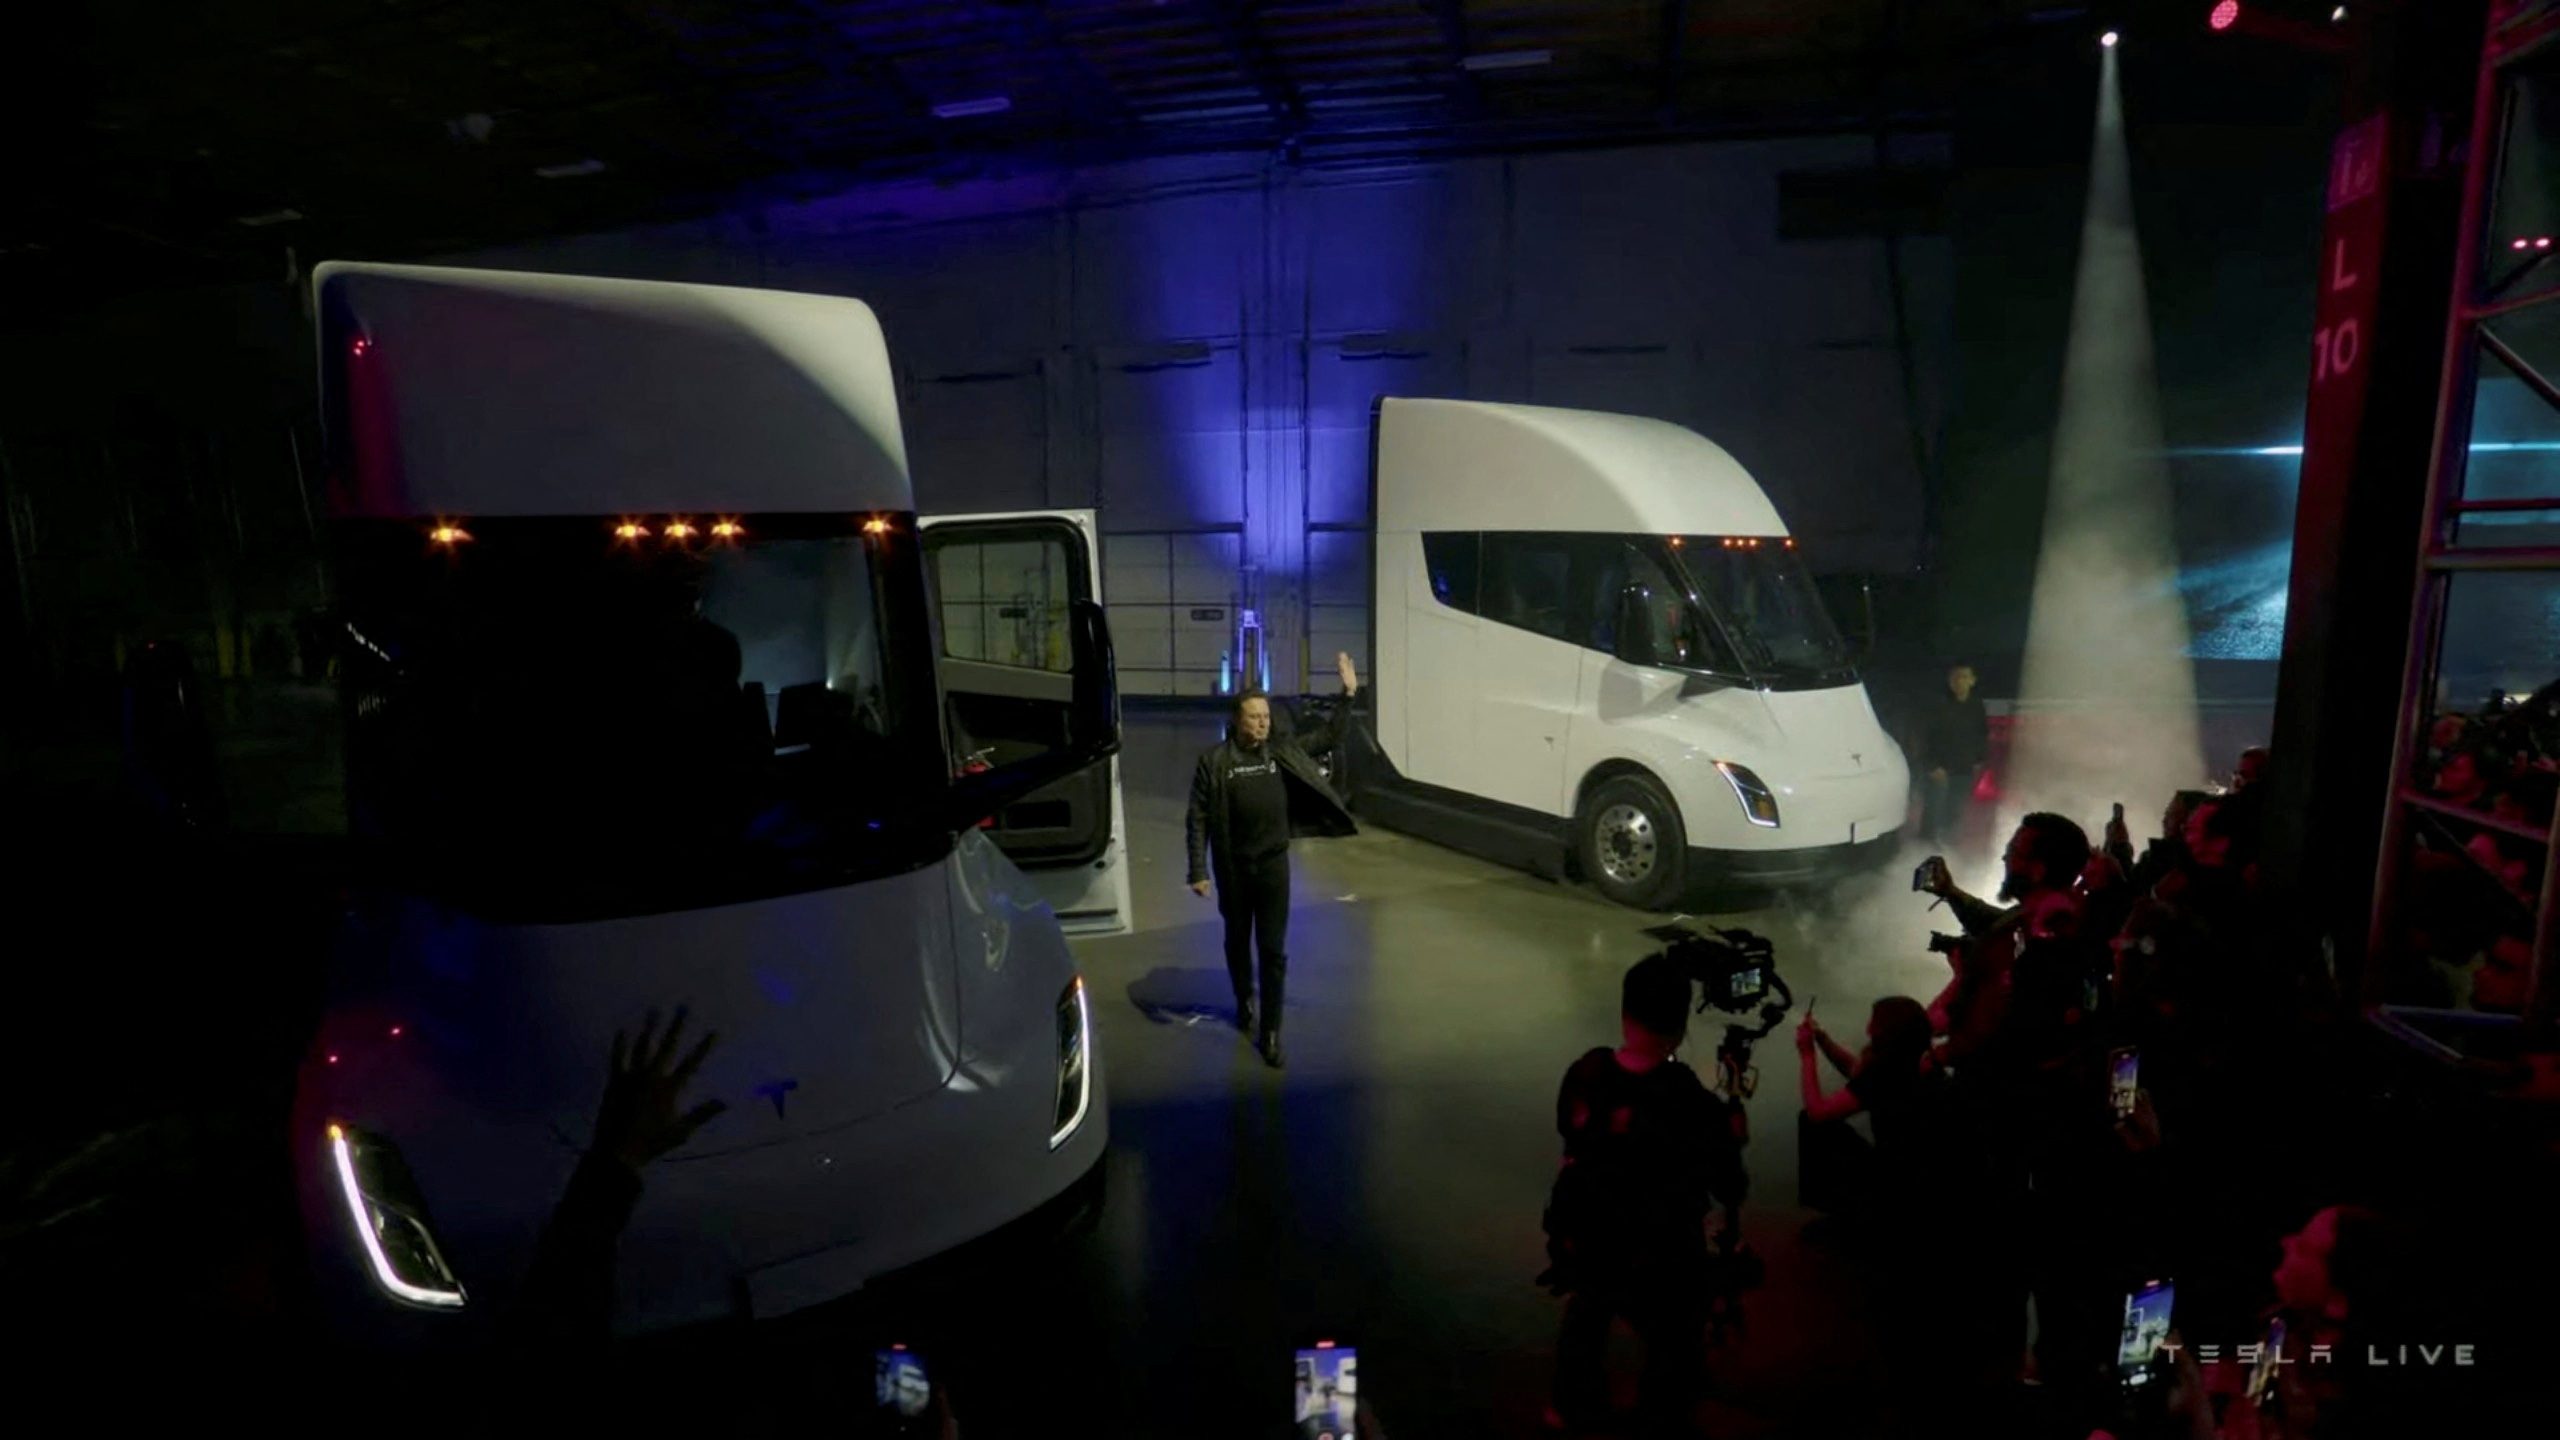 Tesla delivers first heavy-duty truck Semi to PepsiCo, but no update on pricing